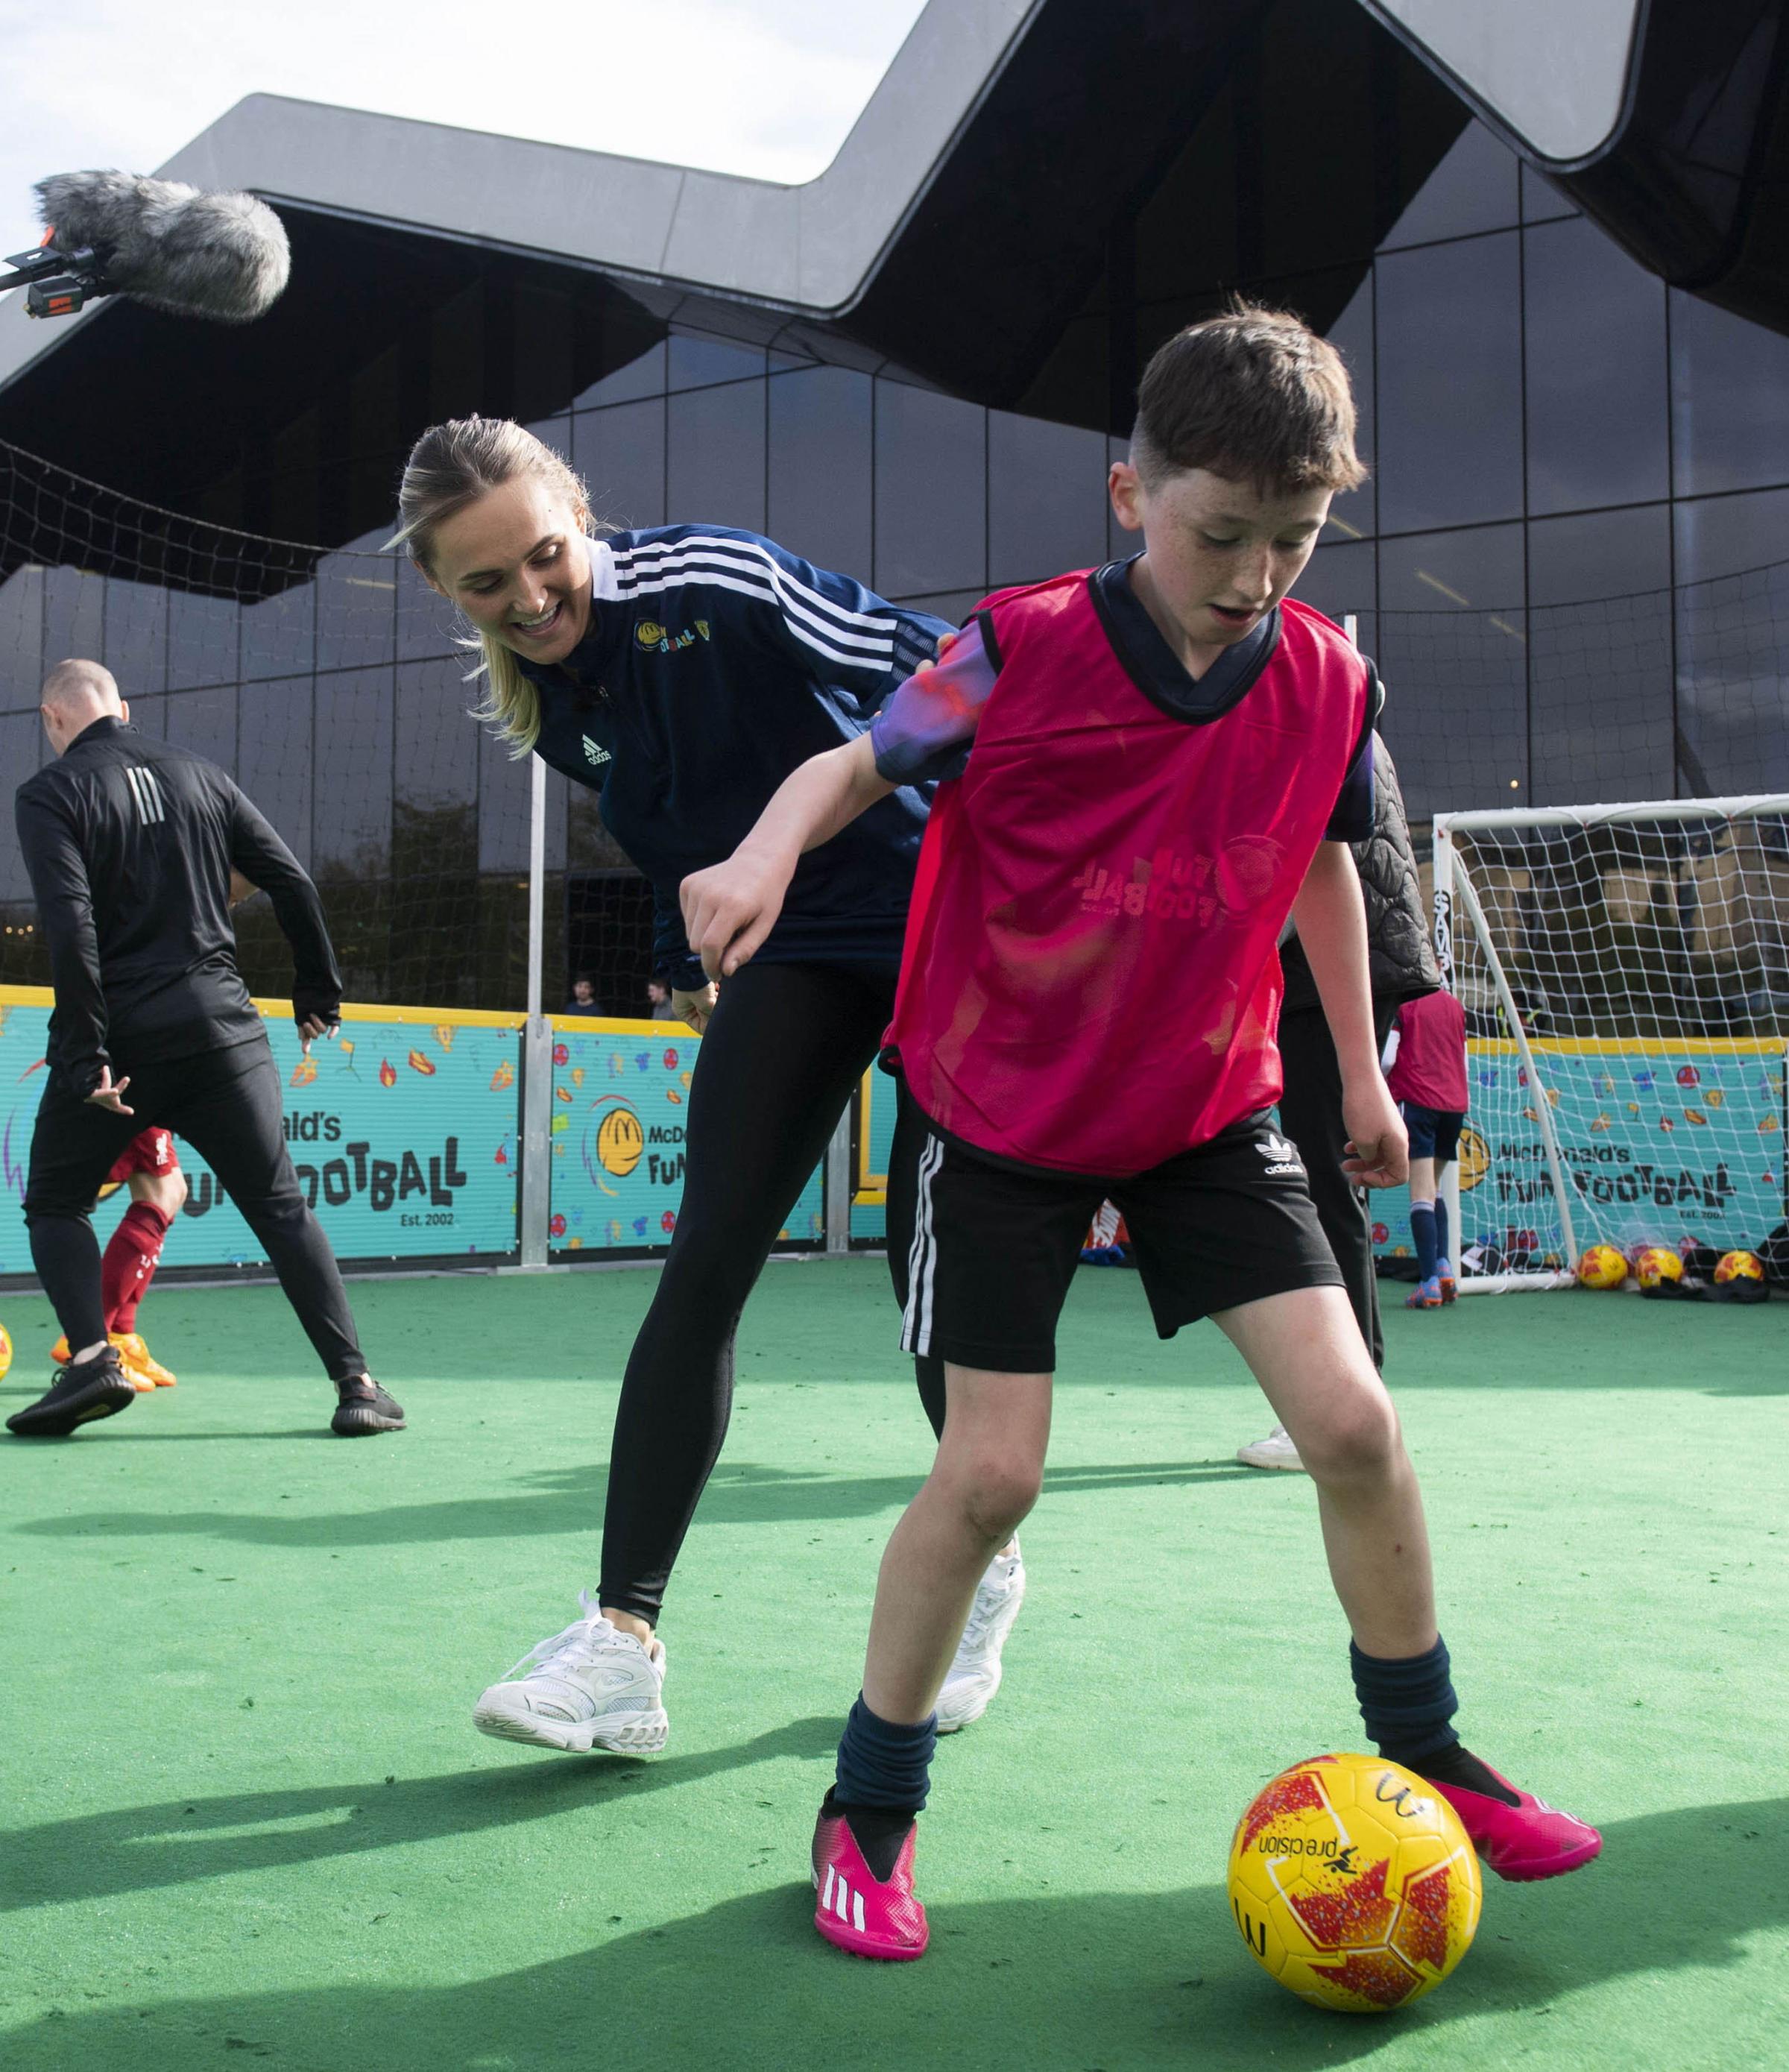 Samantha Kerr joined children for a McDonald’s Fun Football session at The Riverside Museum, Glasgow. McDonald’s provides free fun football coaching for 5–11-year-olds across the UK.